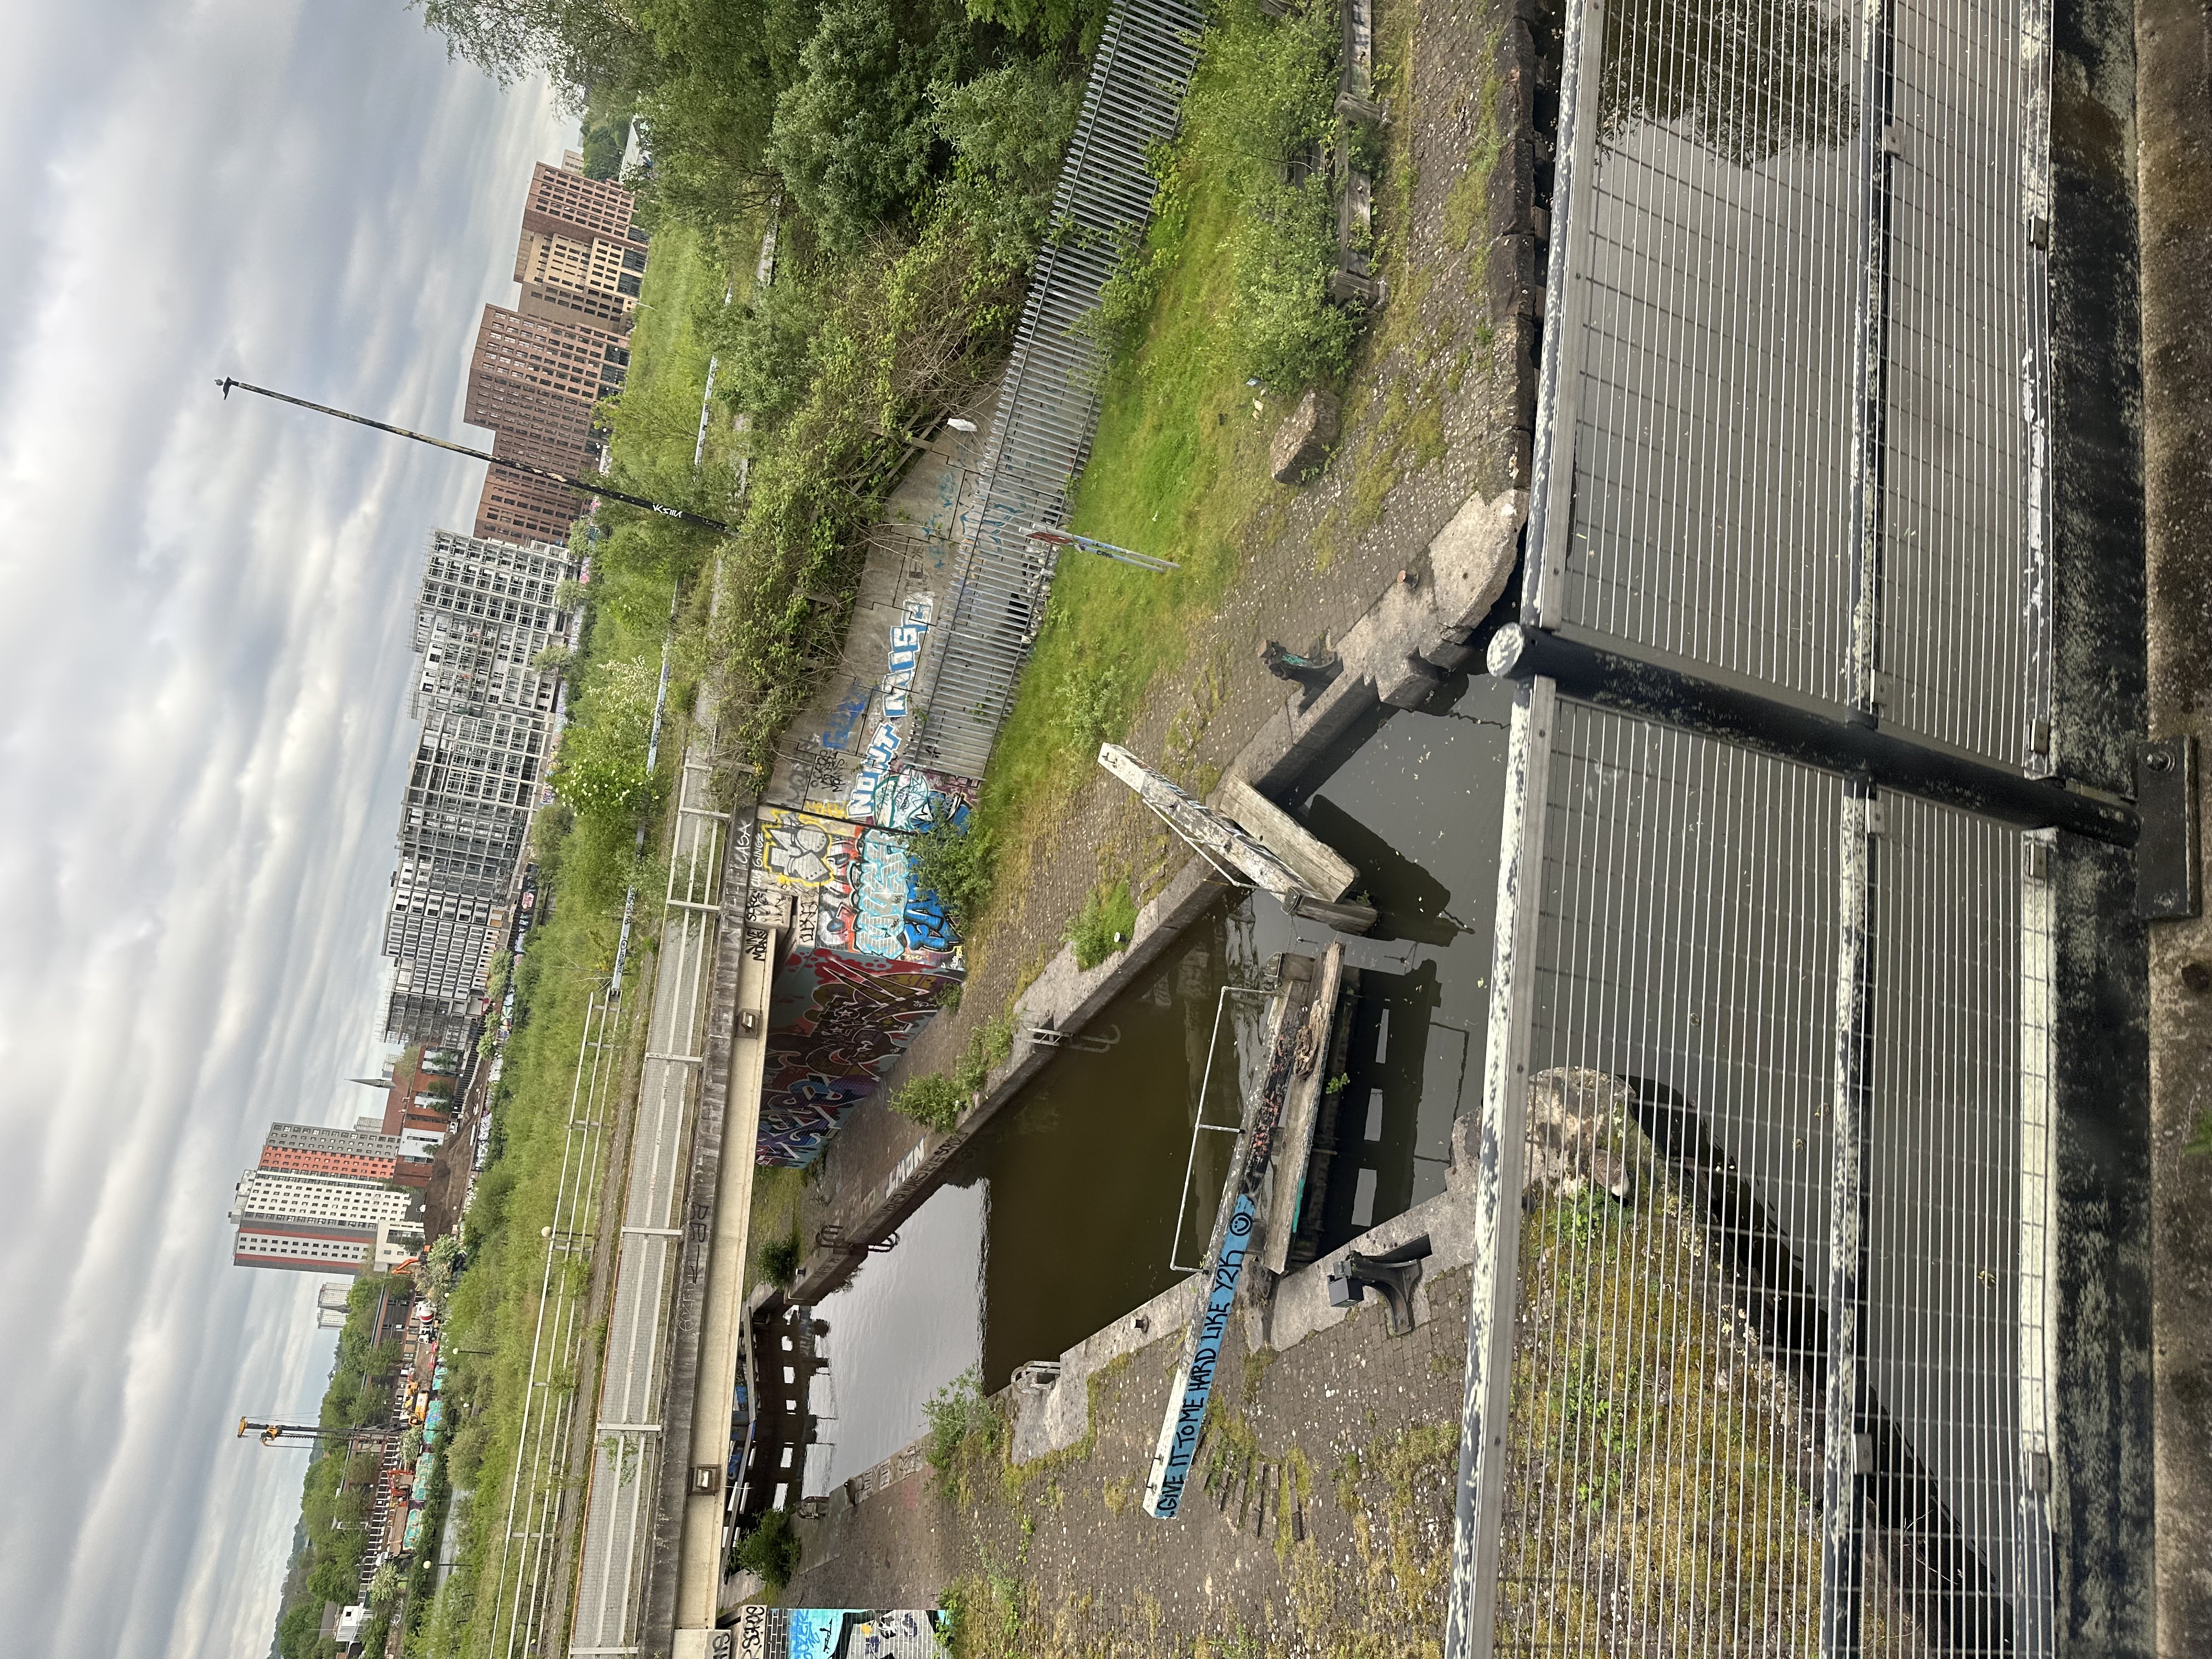 View on manchester over a river, as seen from the tram. On a sluice gate graffity says:'give it to me hard like Y2K'.